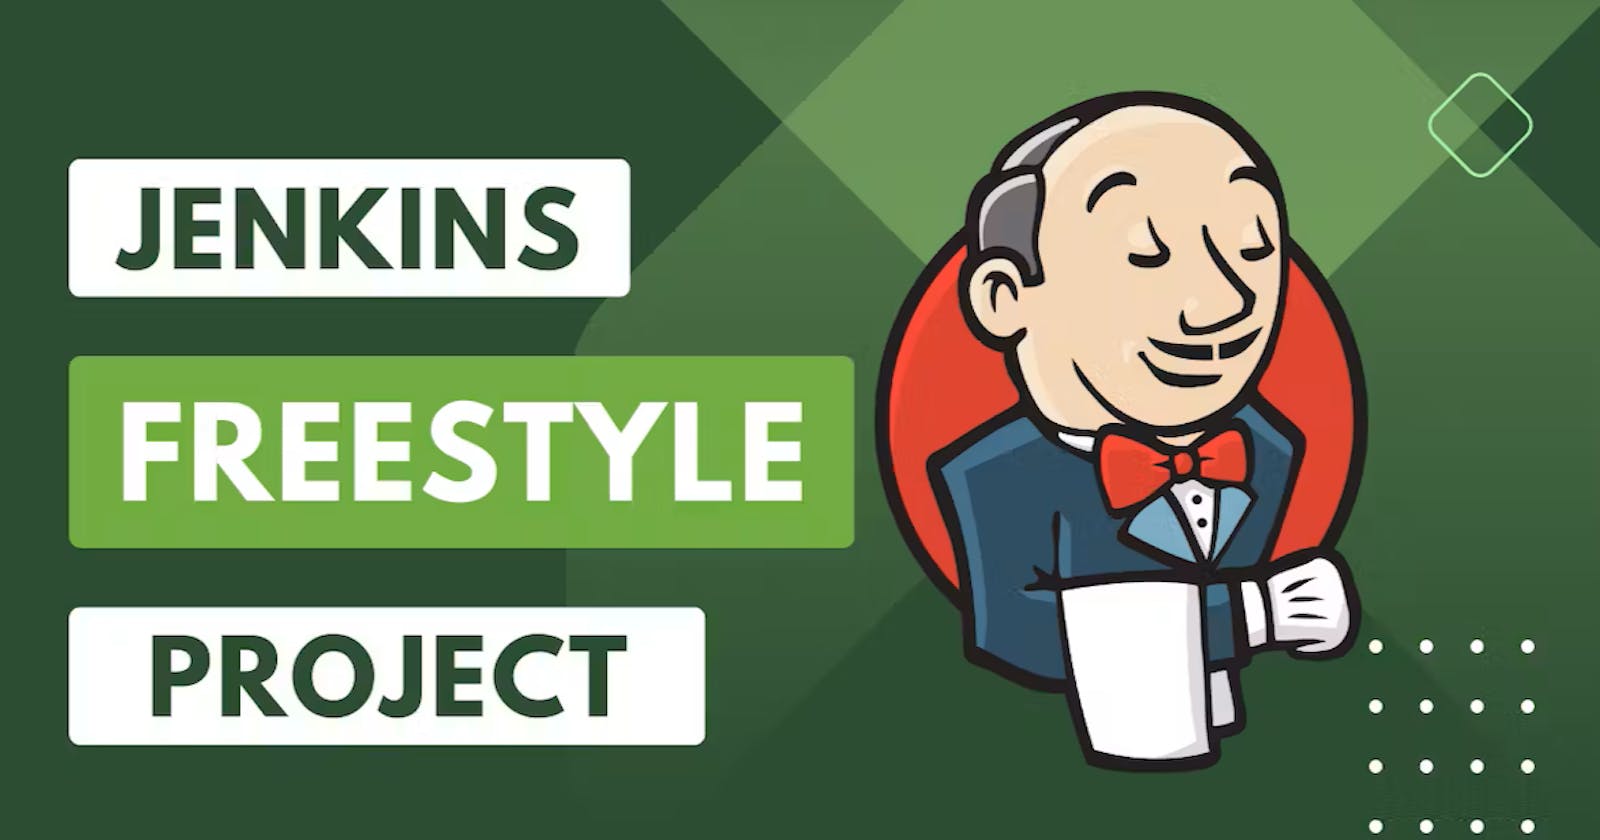 📂Day 23 - Jenkins Freestyle Project.